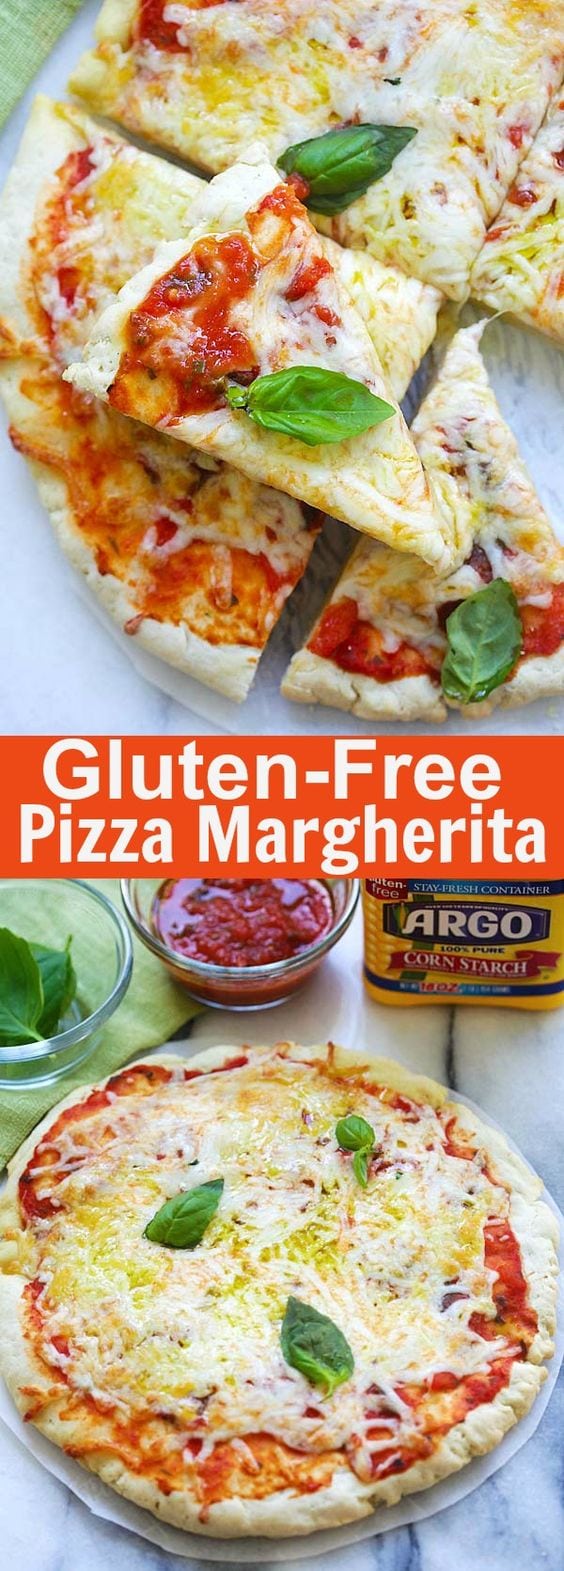 Gluten-Free Pizza Margherita - homemade pizza Margherita with gluten-free crust. Made with Argo® Corn Starch, this pizza is so delicious | rasamalaysia.com